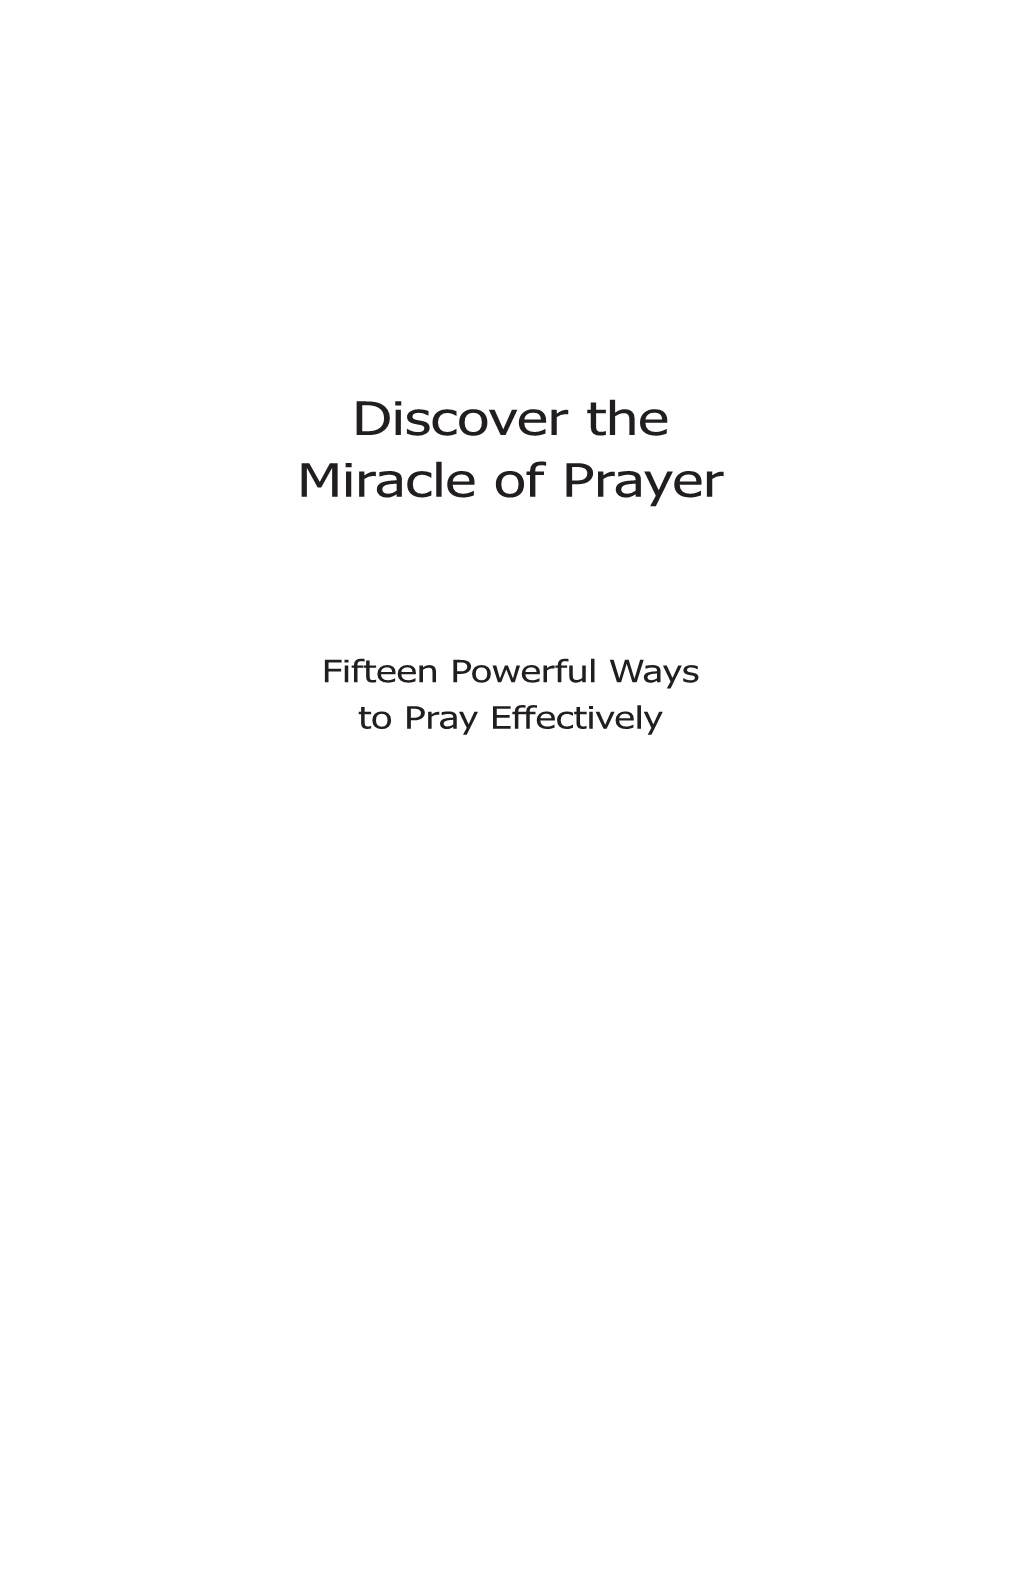 Discover the Miracle of Prayer